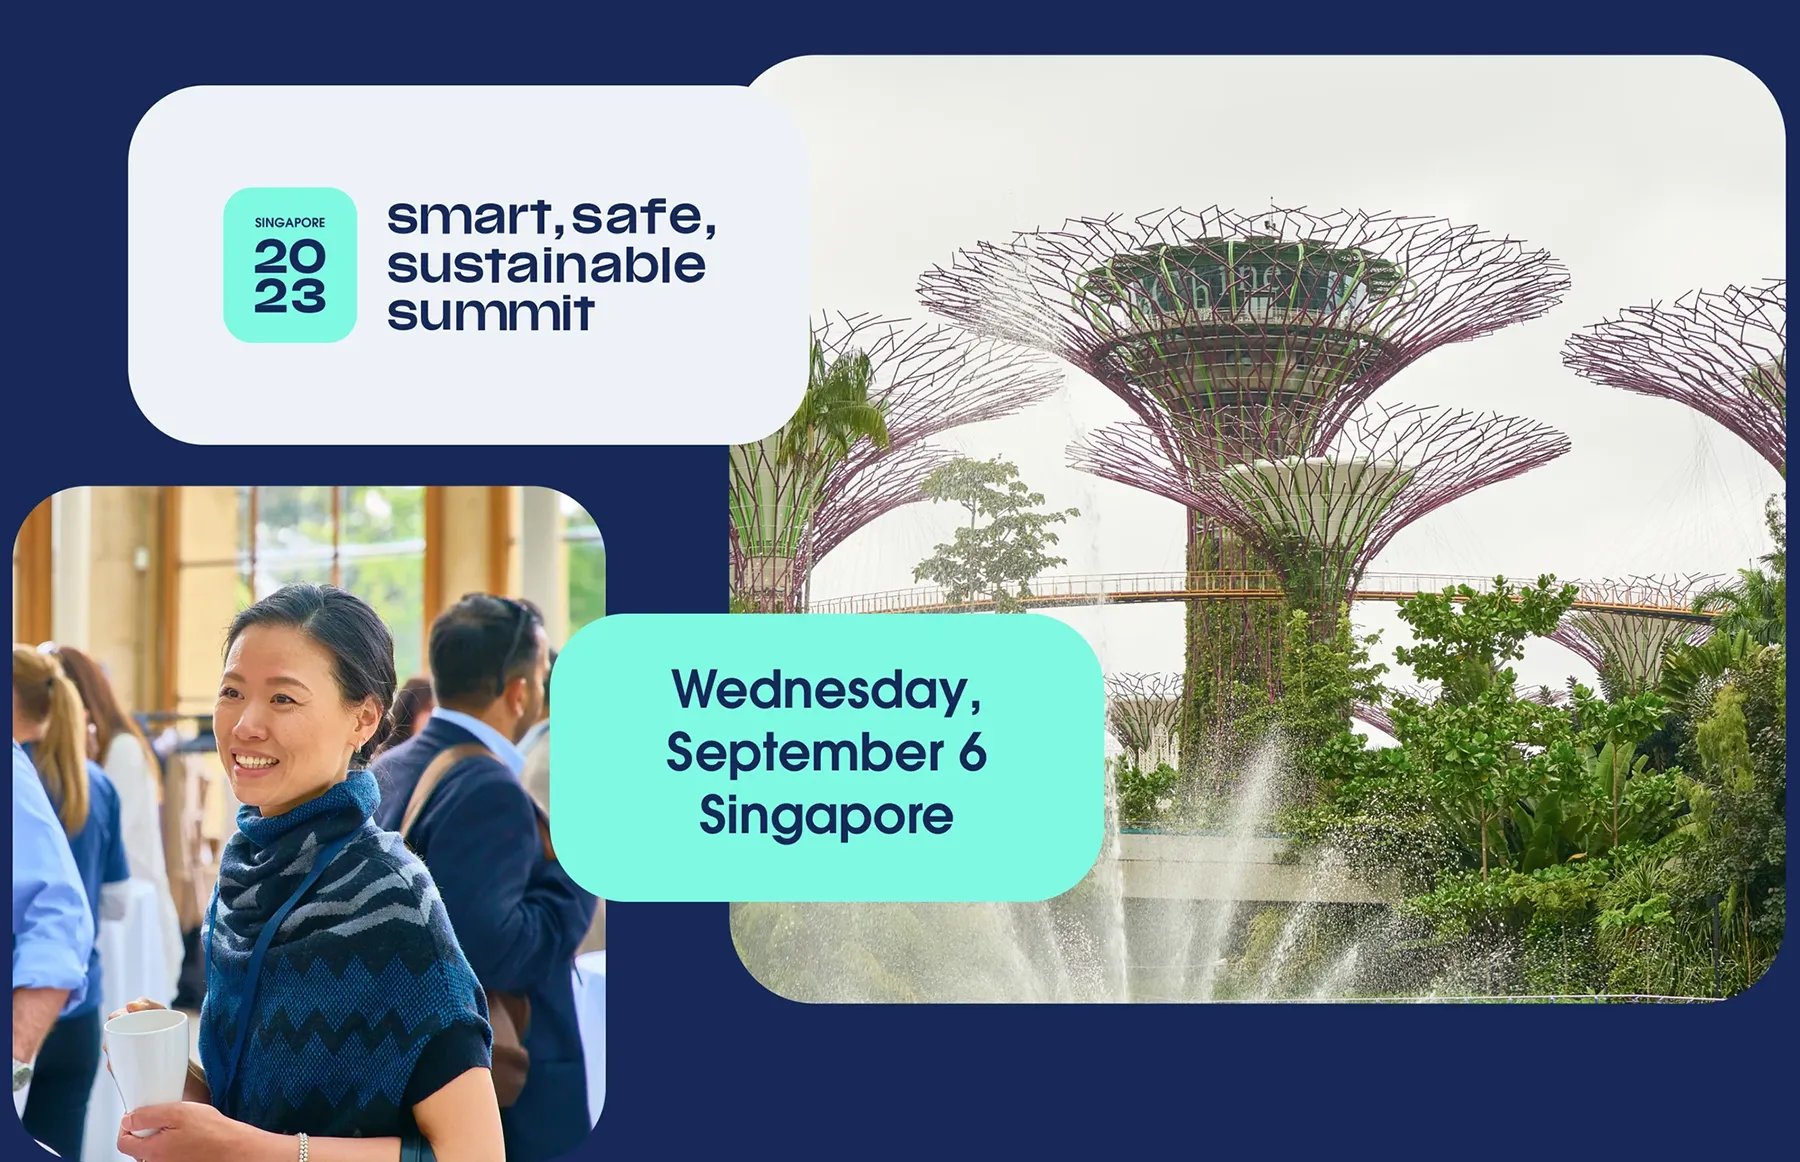 Access all of the sessions on demand now Singapore